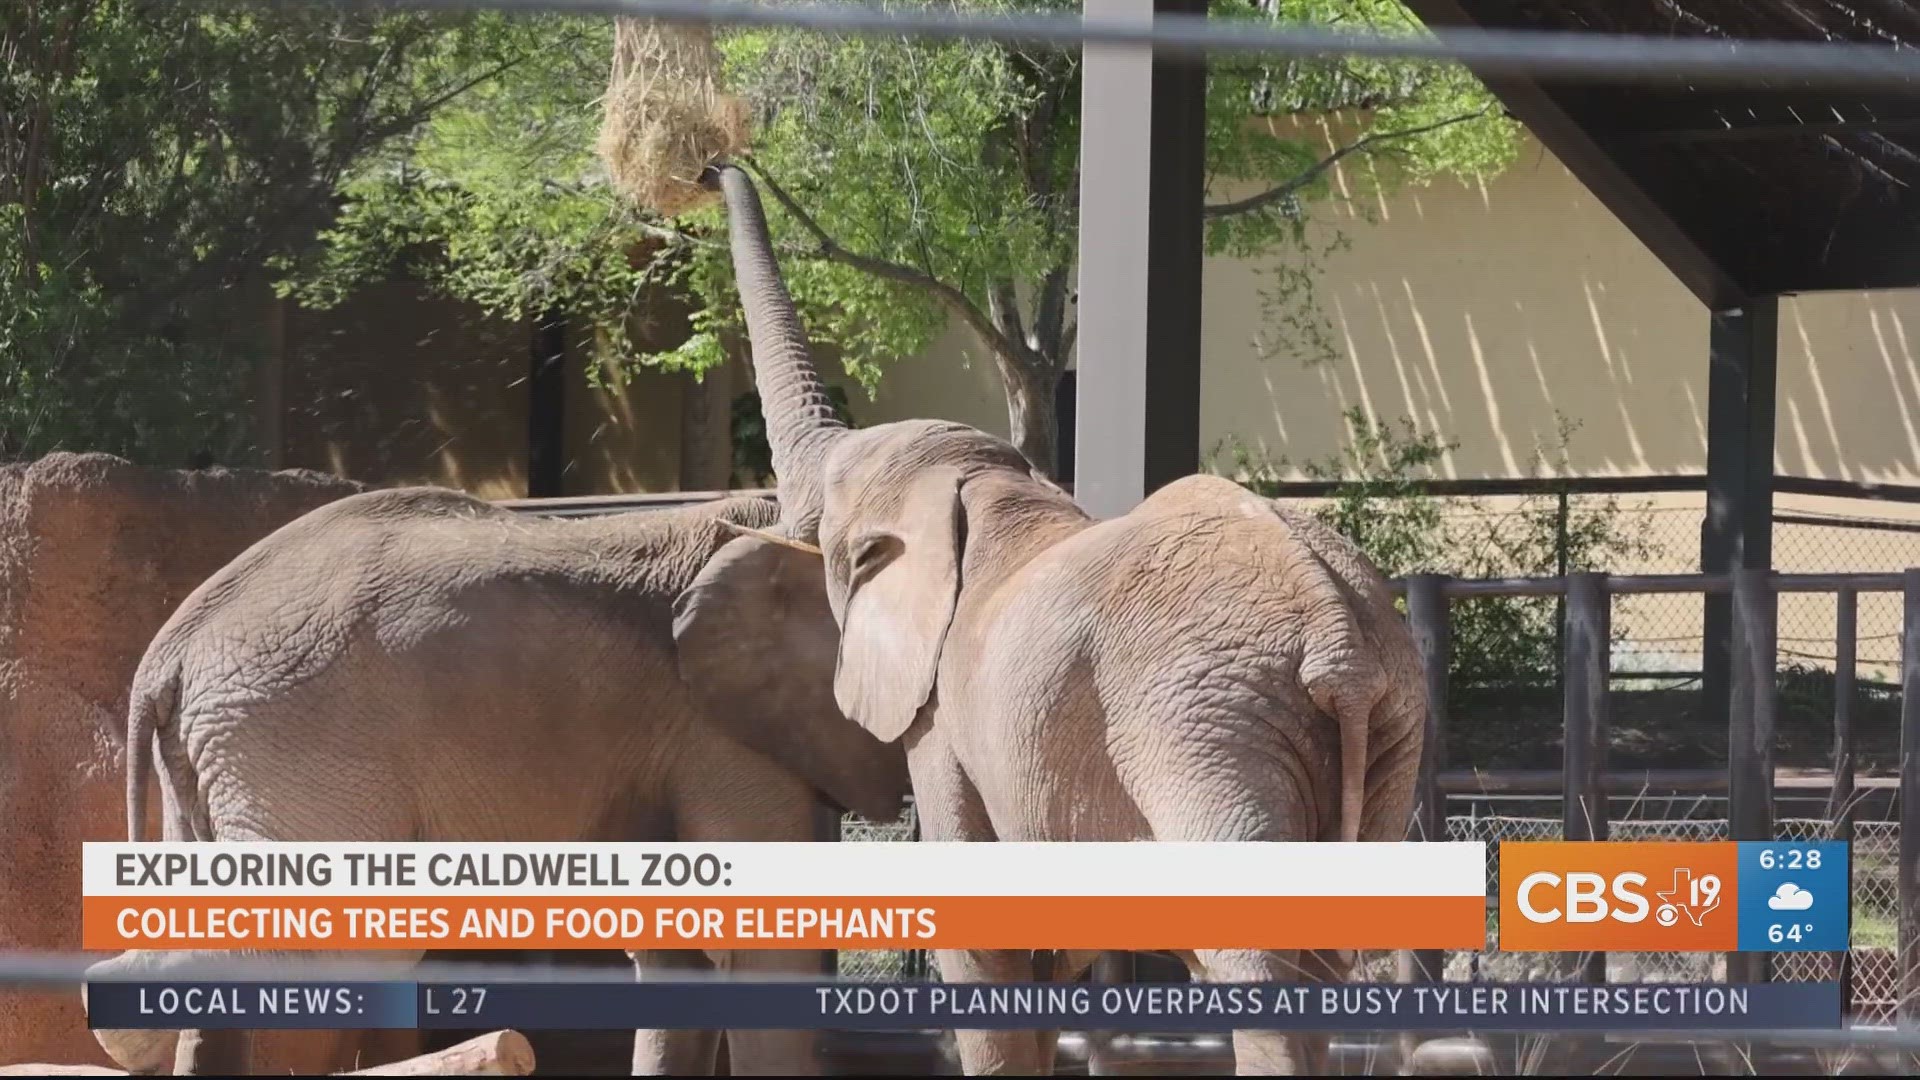 For more behind-the-scenes zoo content, watch CBS19 on Fridays during Morning Y'all for the weekly segment, Exploring the Caldwell Zoo